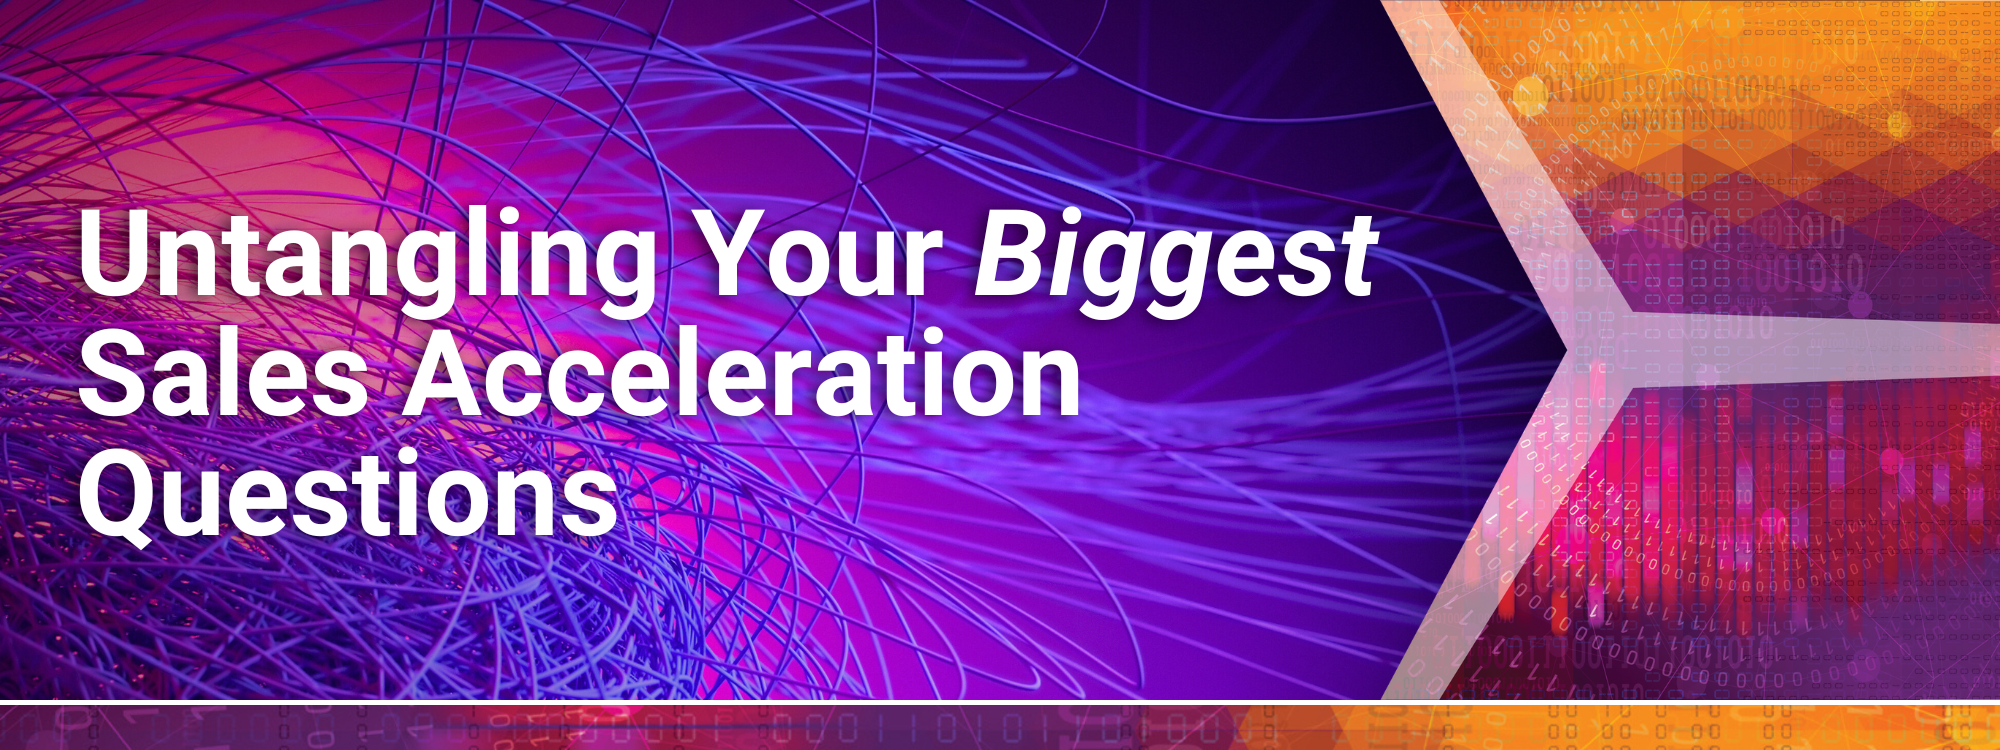 Untangling Your Biggest Sales Acceleration Questions